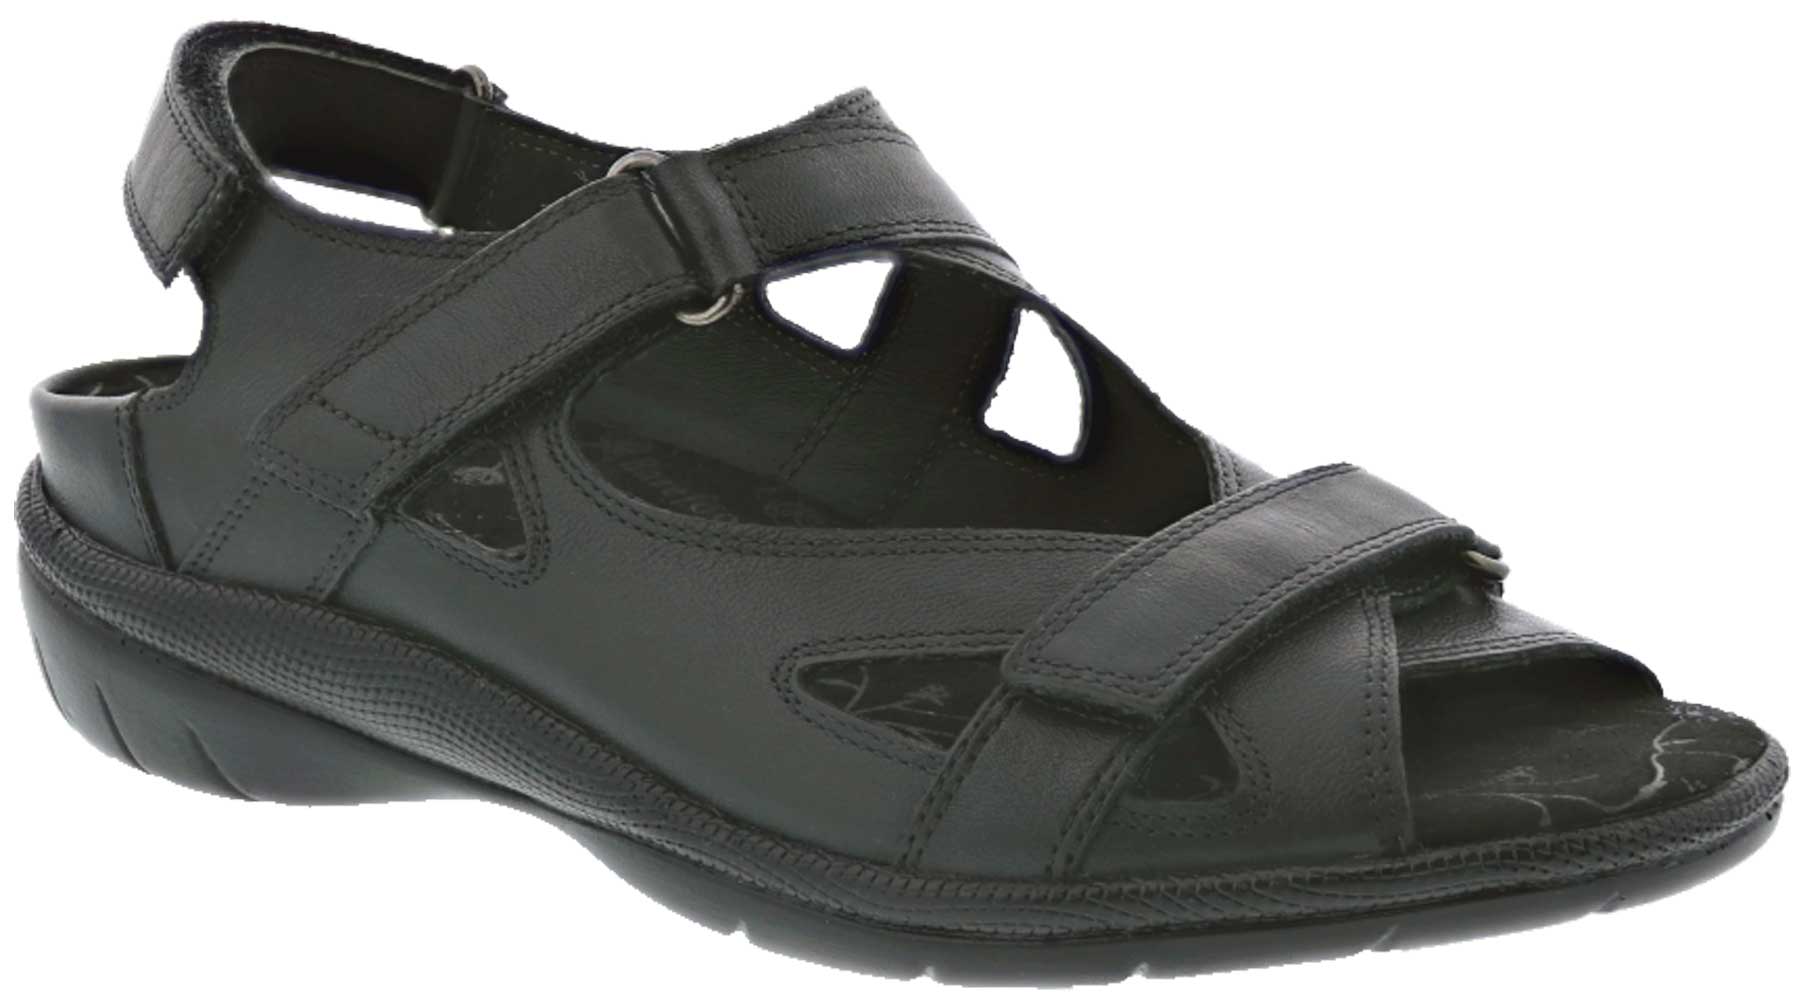 Drew Shoes Lagoon 17364 - Women's Casual Comfort Therapeutic Sandal